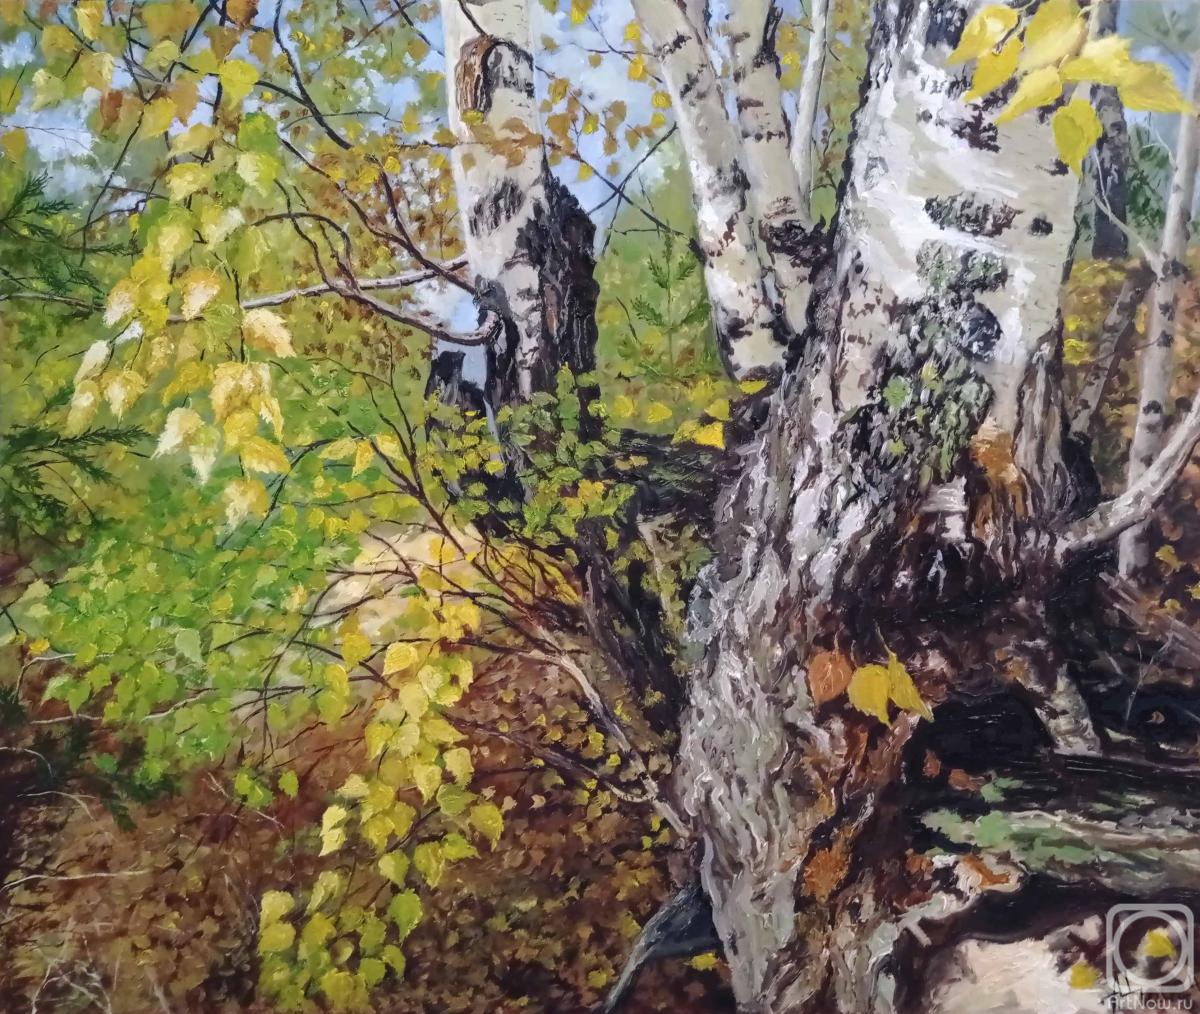 Tsygankov Alexander. In the autumn forest